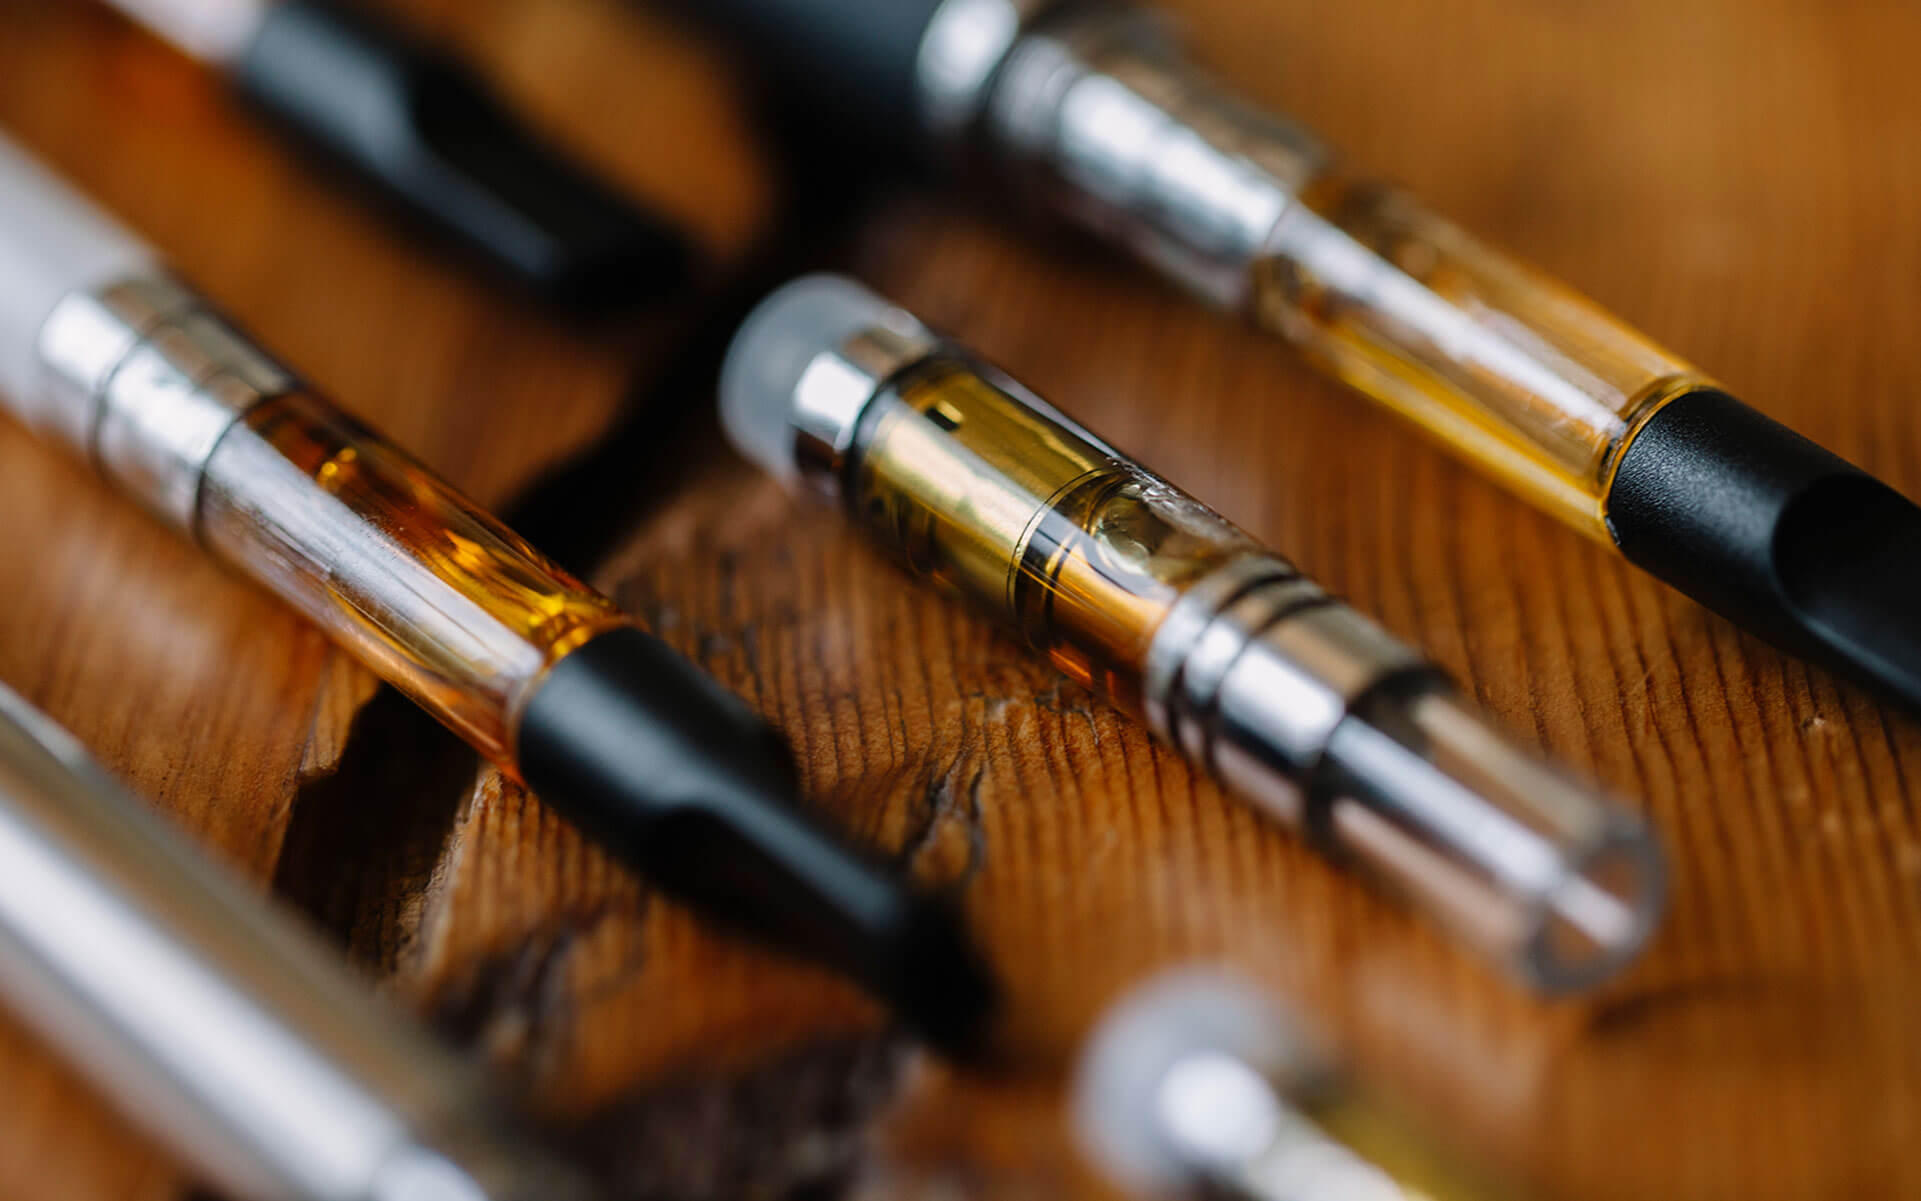 Vaping May Cause Male Infertility According To ObGyn Doctor - WORLD OF BUZZ 4